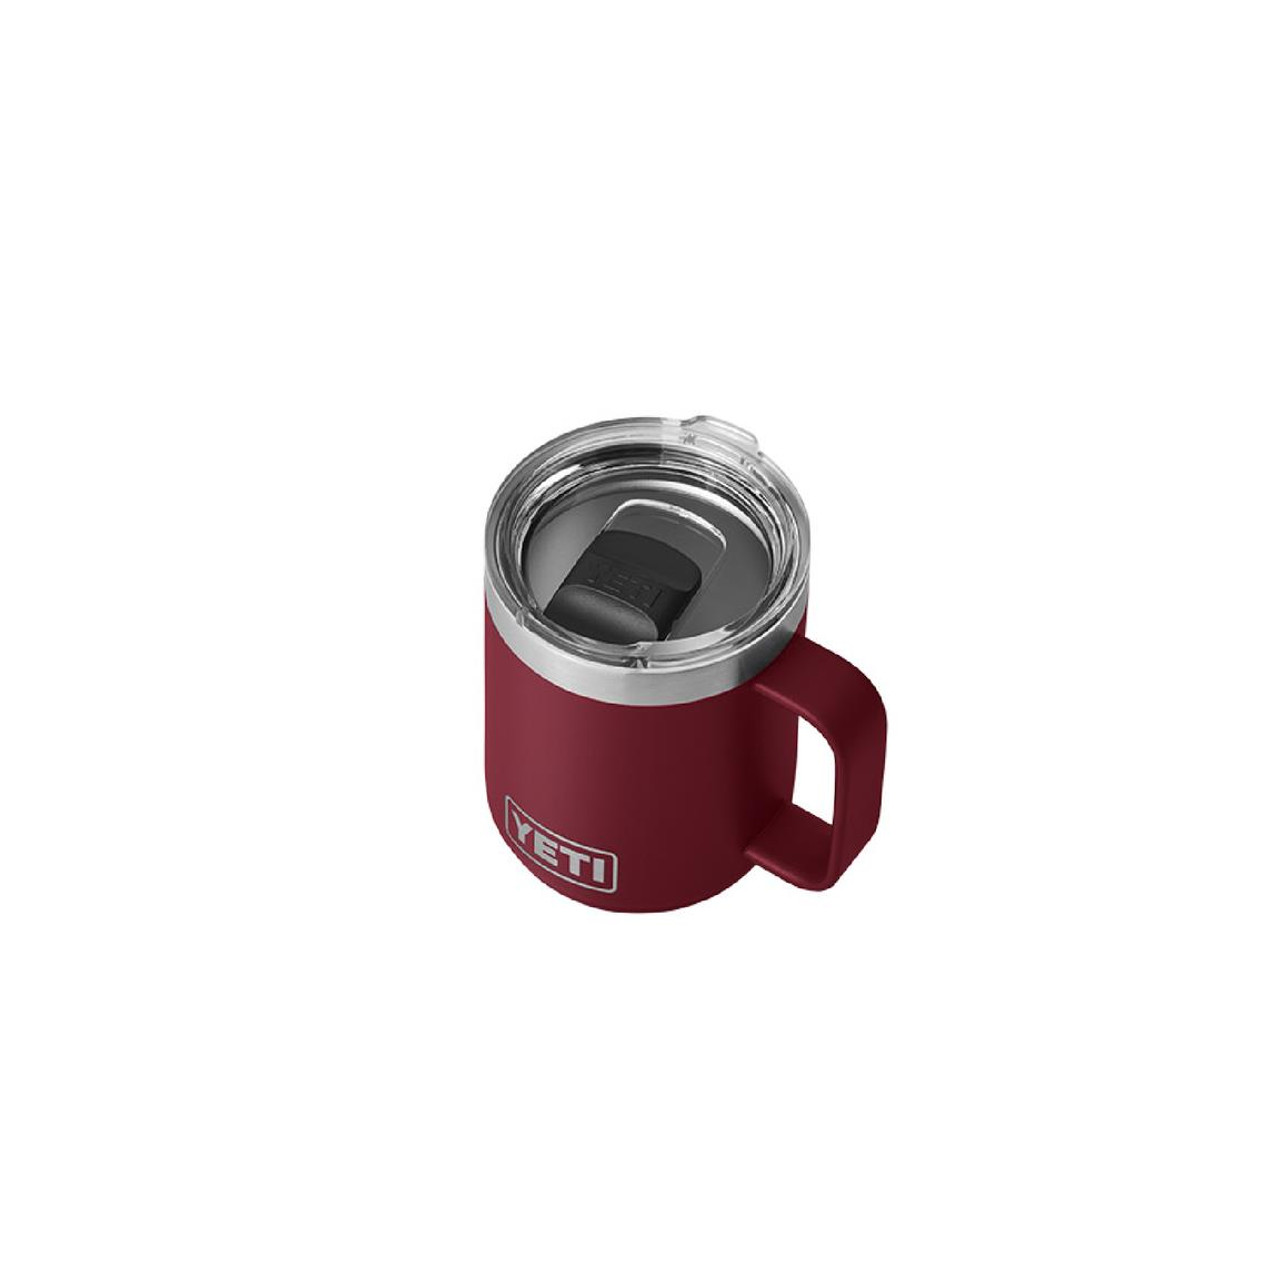 https://cdn11.bigcommerce.com/s-stfpjhht/images/stencil/1280x1280/products/23713/43782/Yeti-Rambler-10-Oz-Stackable-Mug-With-Magslider-Lid-Harvest-Red-21071500660-888830130049_image1__37356.1632255034.jpg?c=2